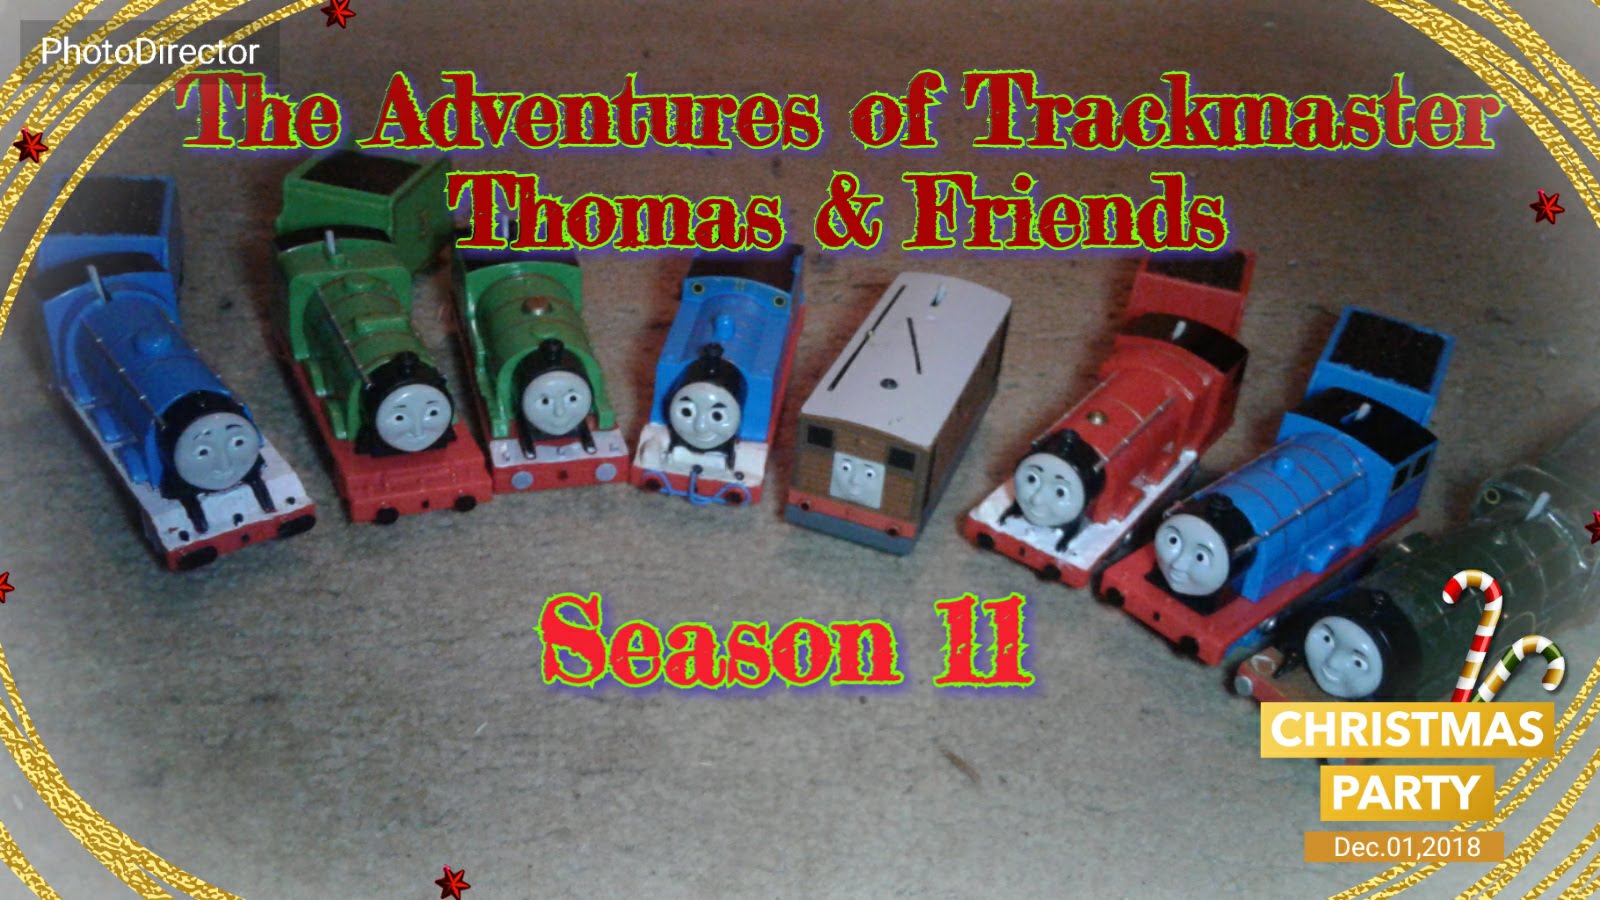 old trackmaster trains